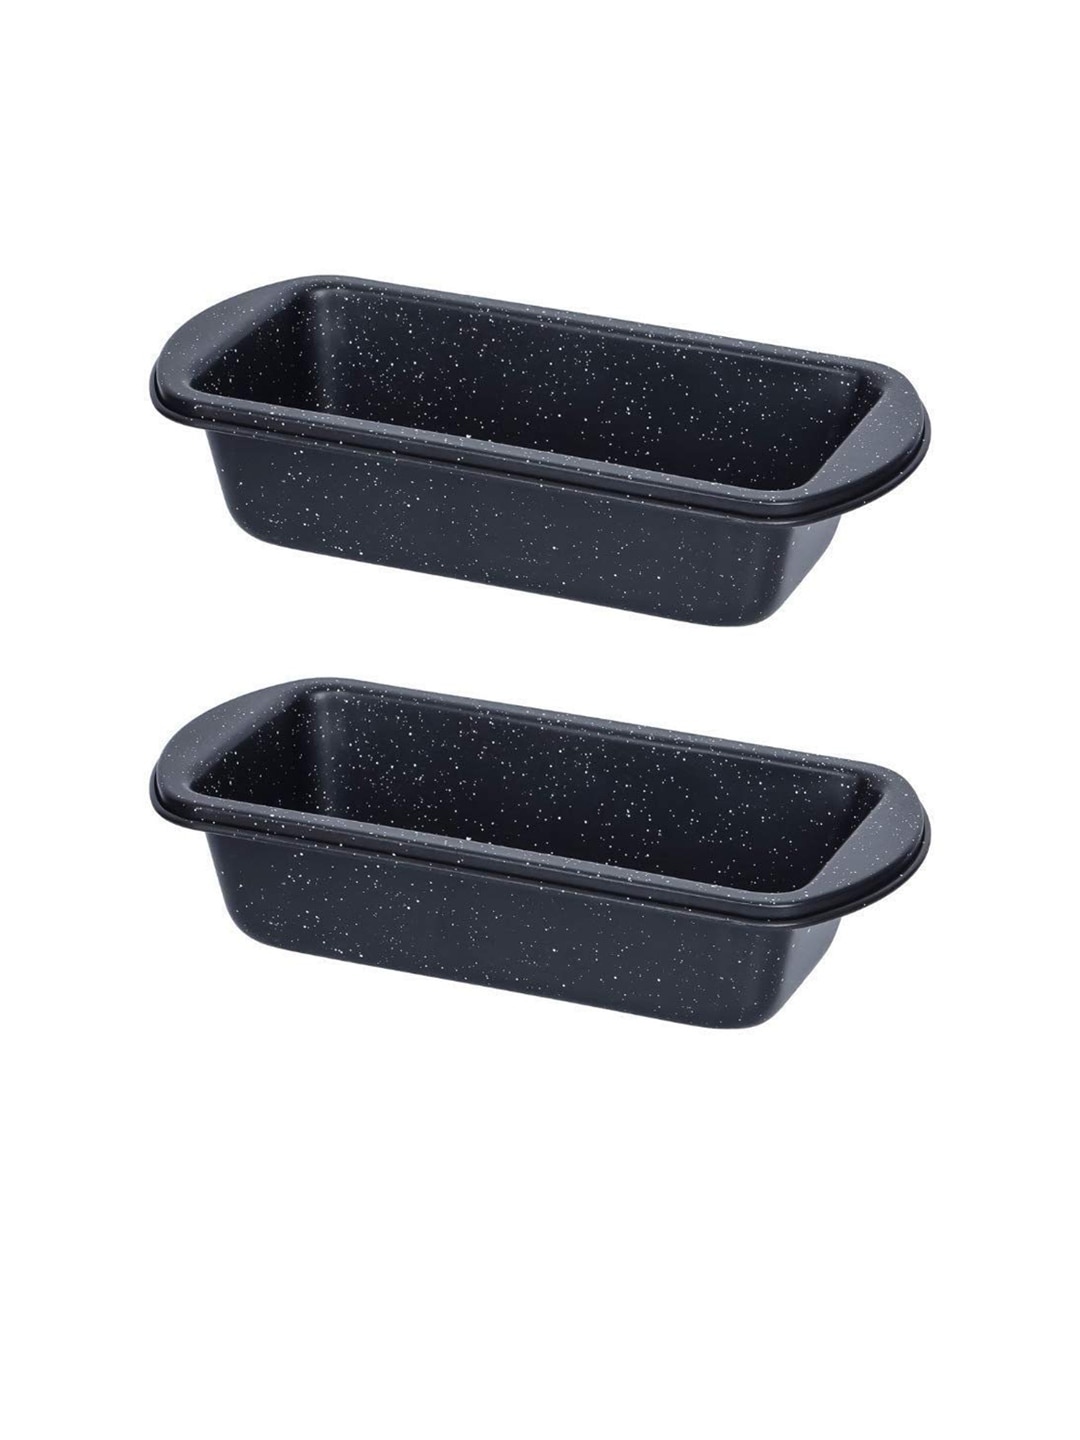 Femora Charcoal Grey Set of 2 Carbon Steel Non-Stick Baking Loaf Pan Price in India